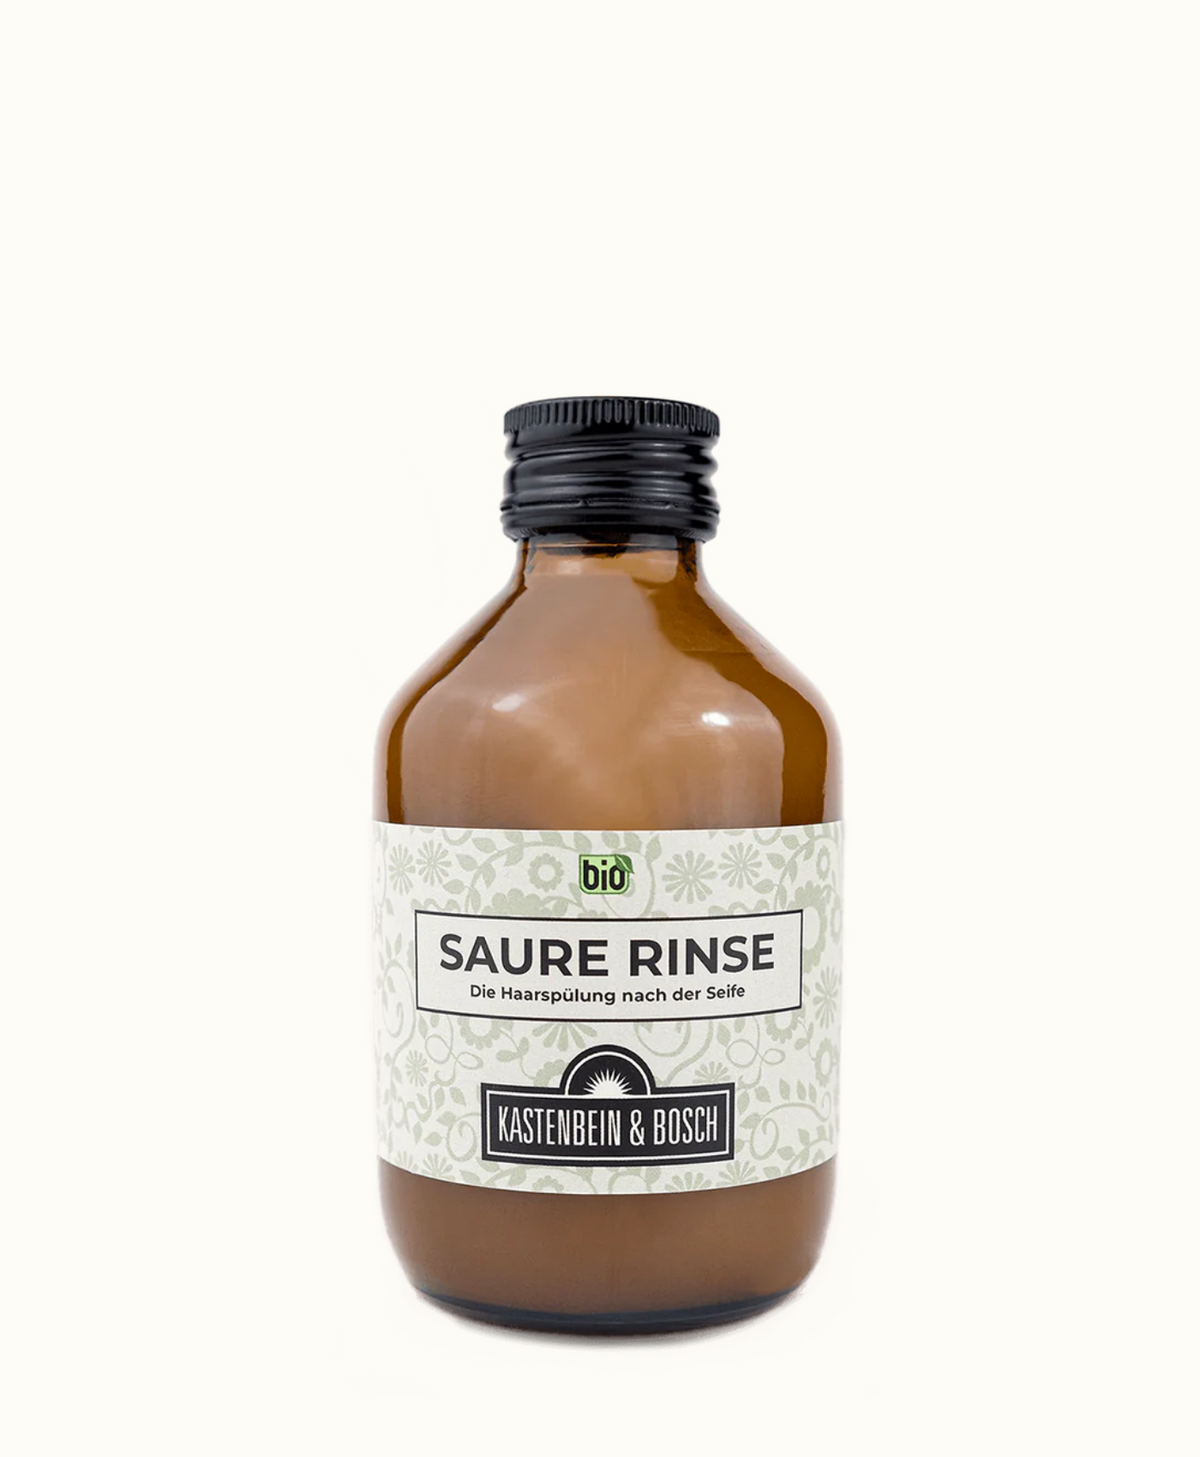 Saure Rinse Best of the Rest